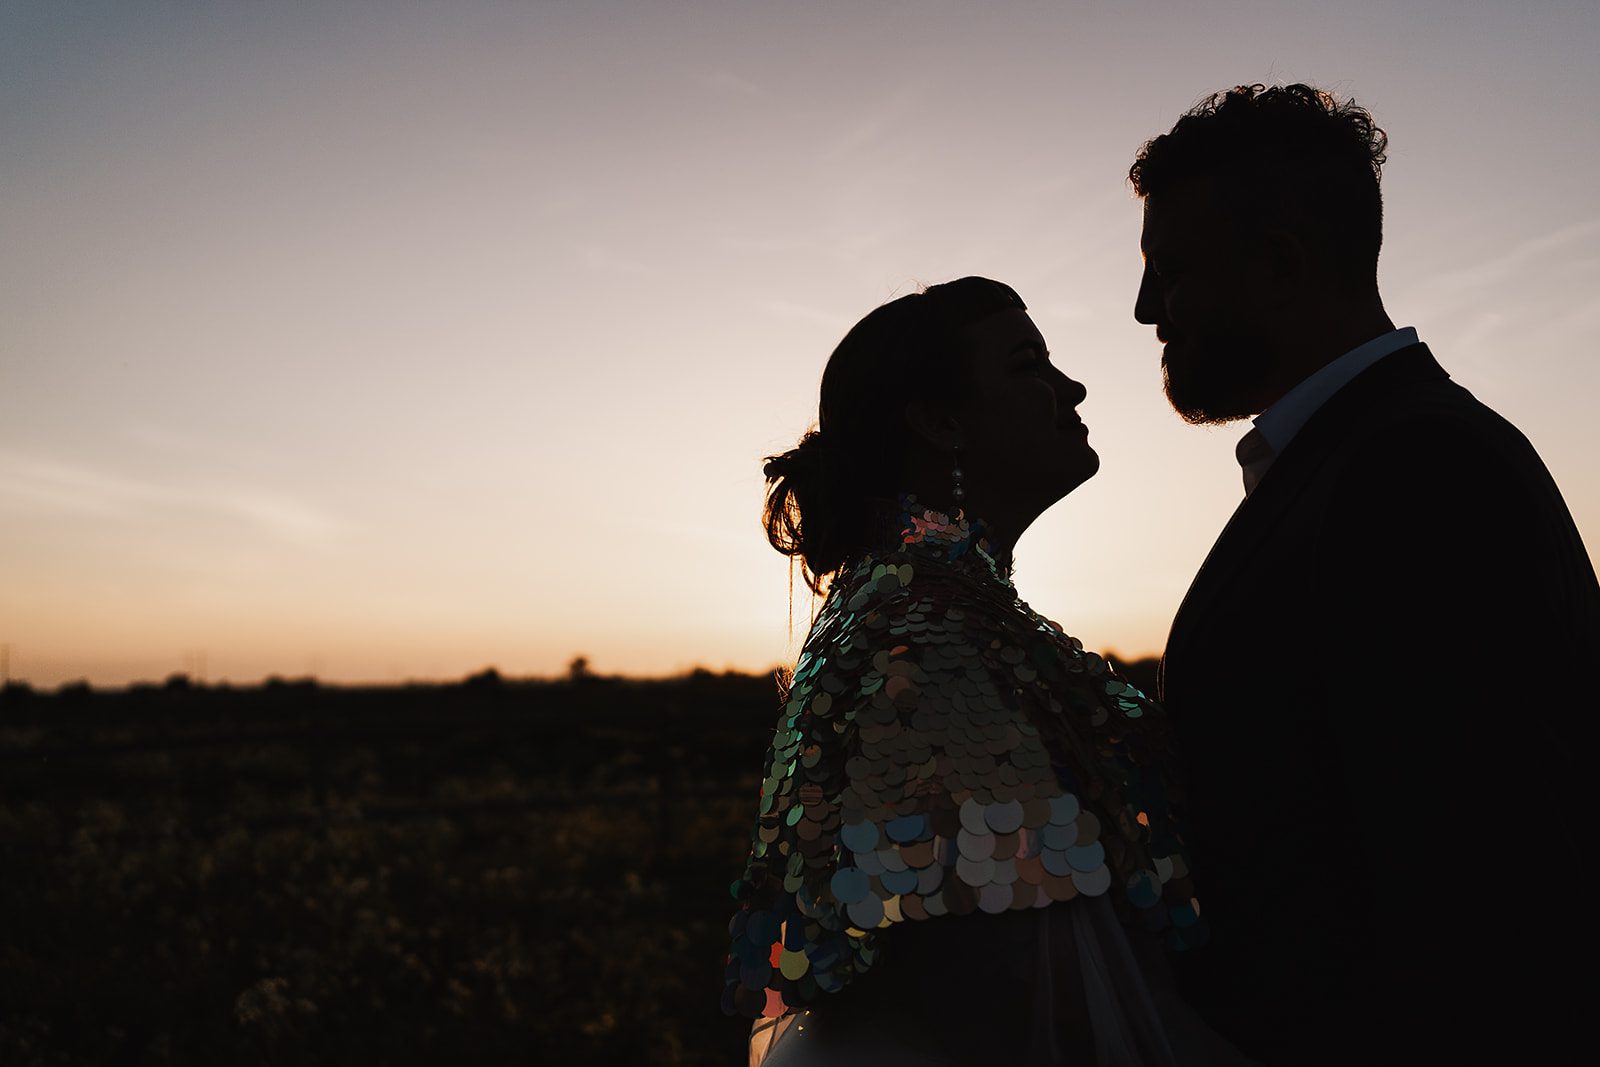 bride and groom silhouette at sunset